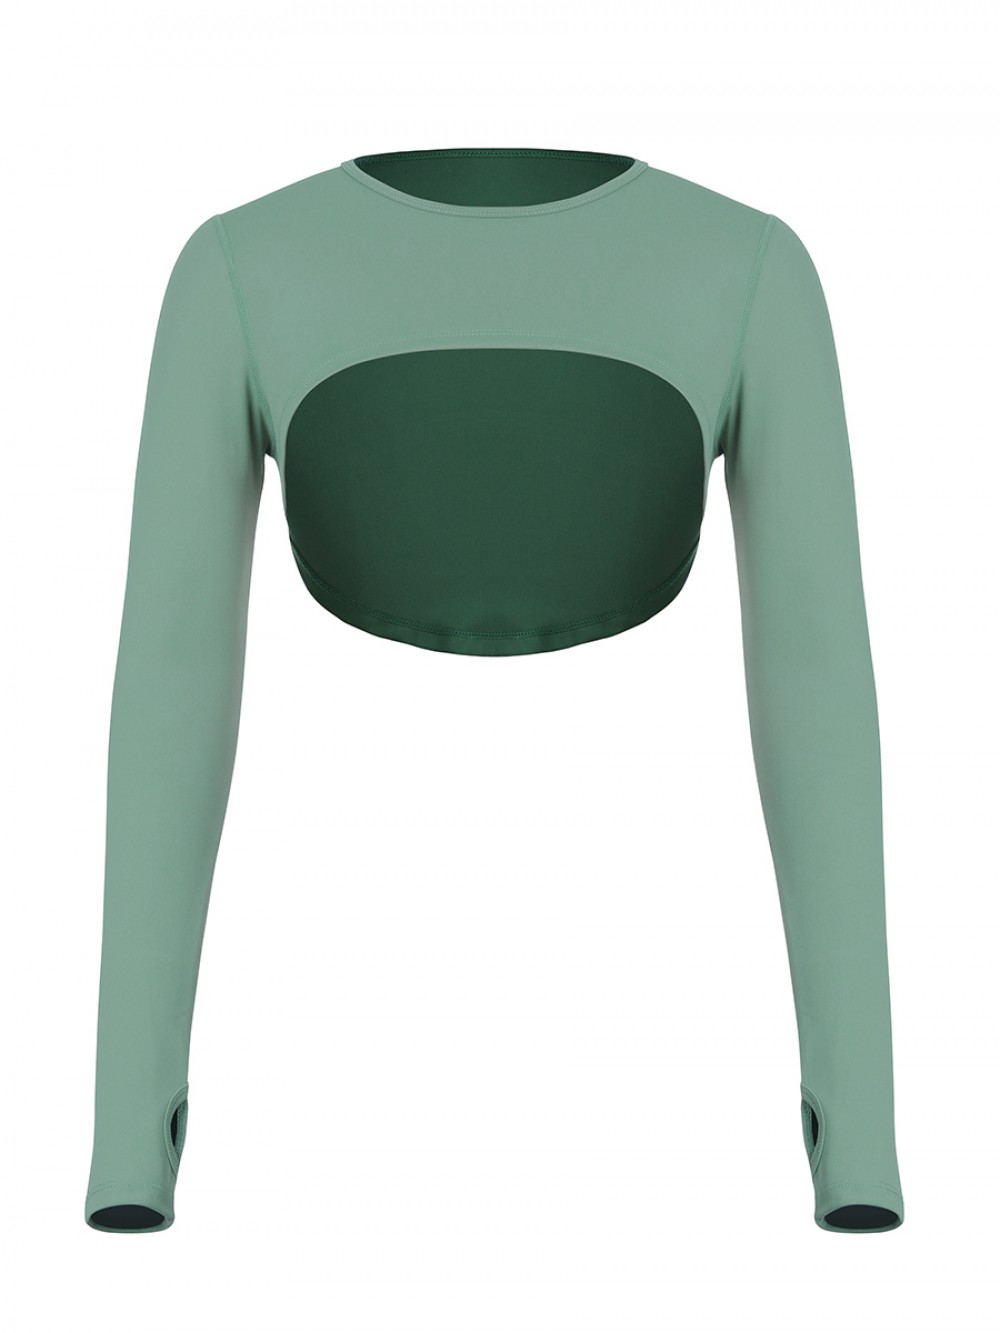 Green High-Low Hem Top Thumbhole Full Sleeve Young Style